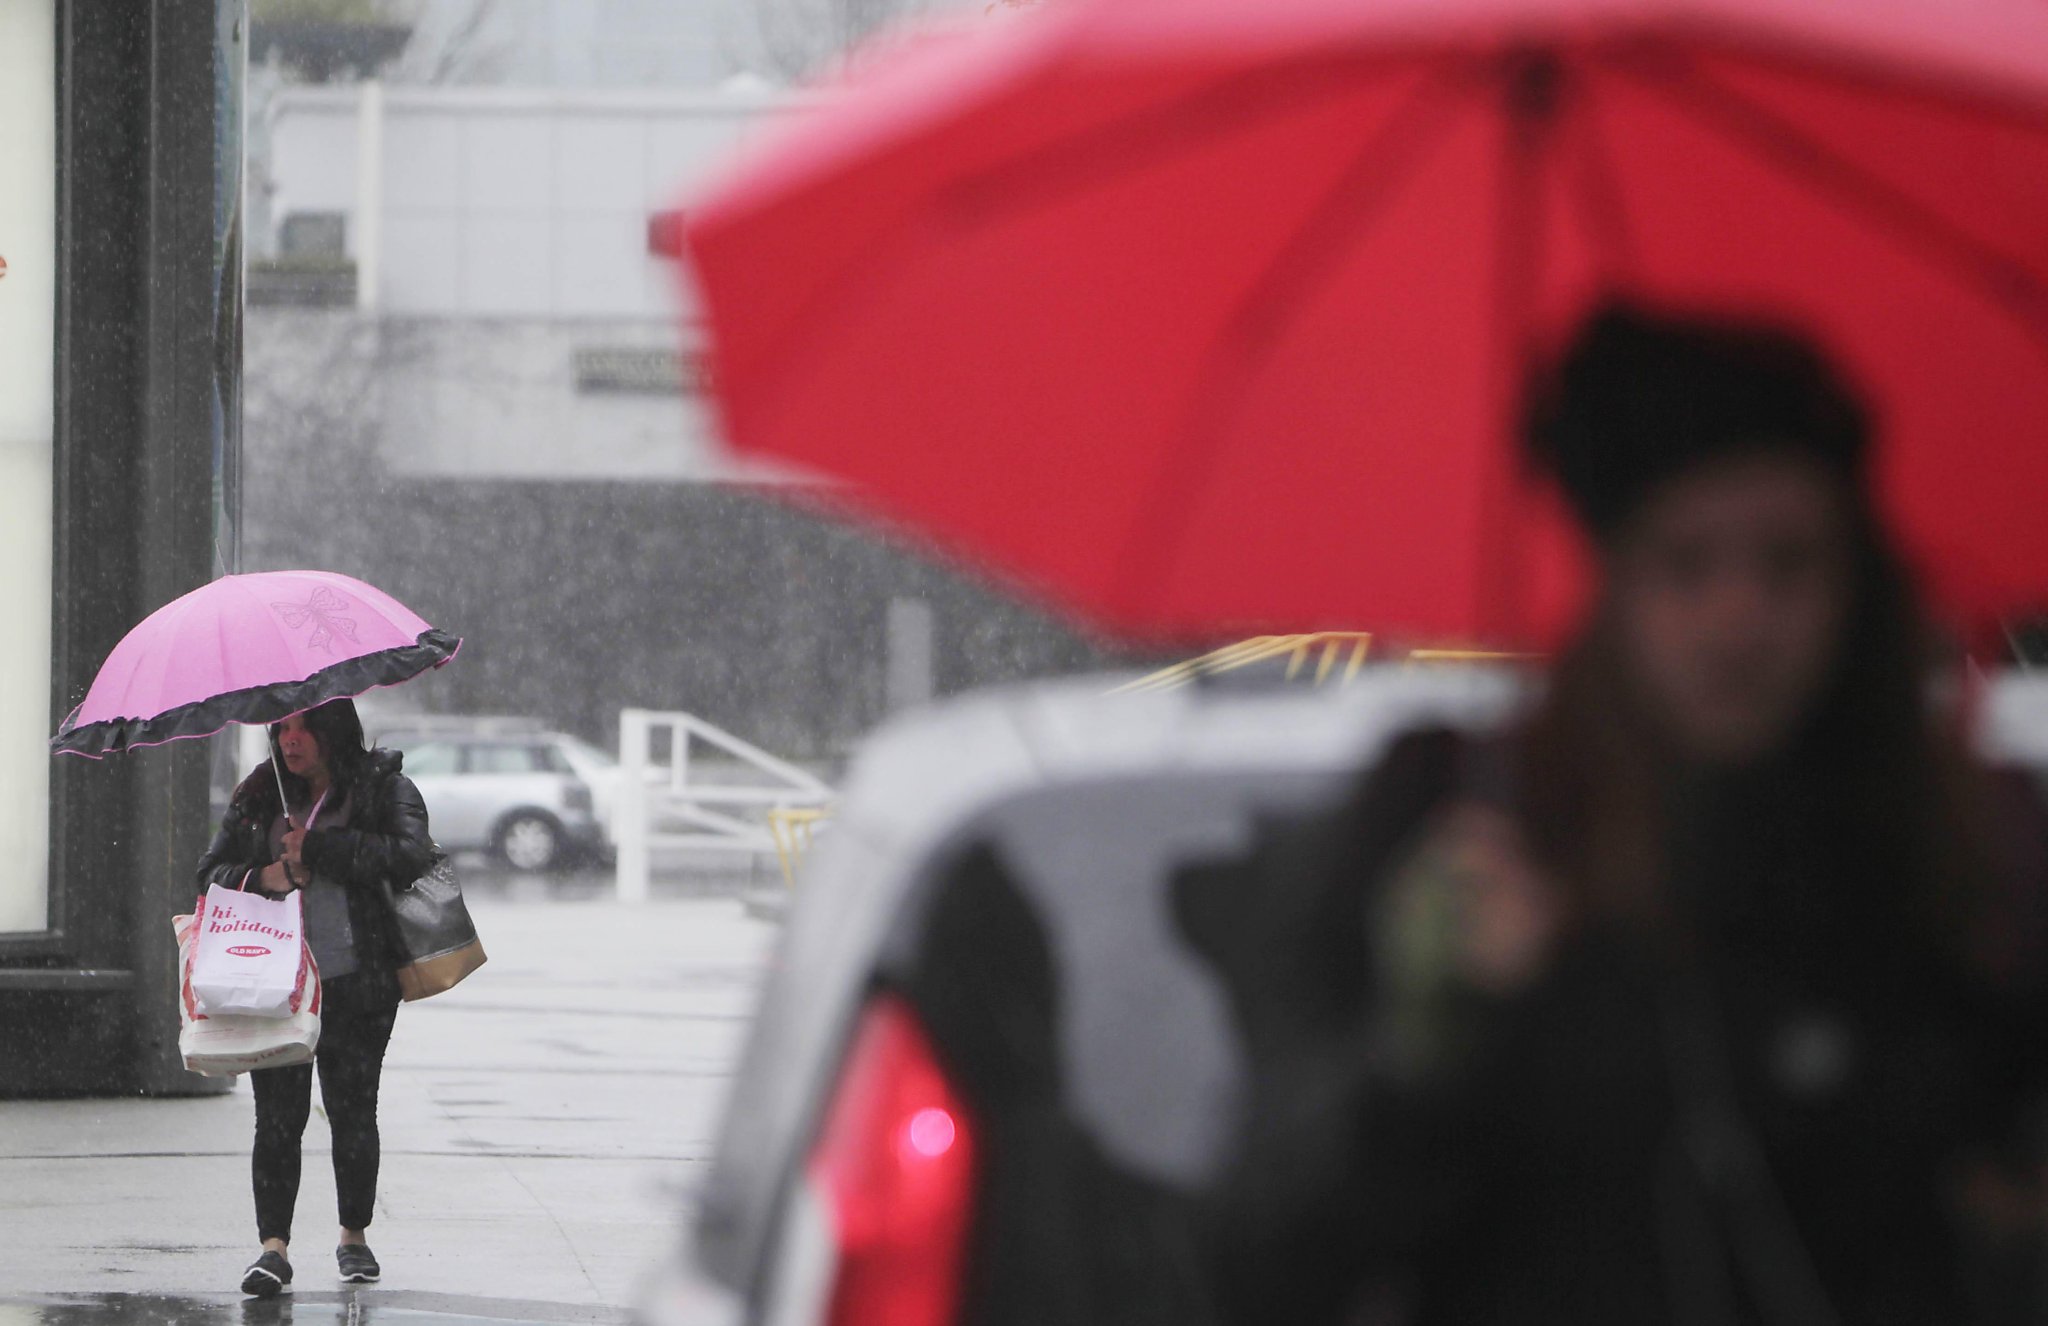 SF sees most October rainy days since 19th century